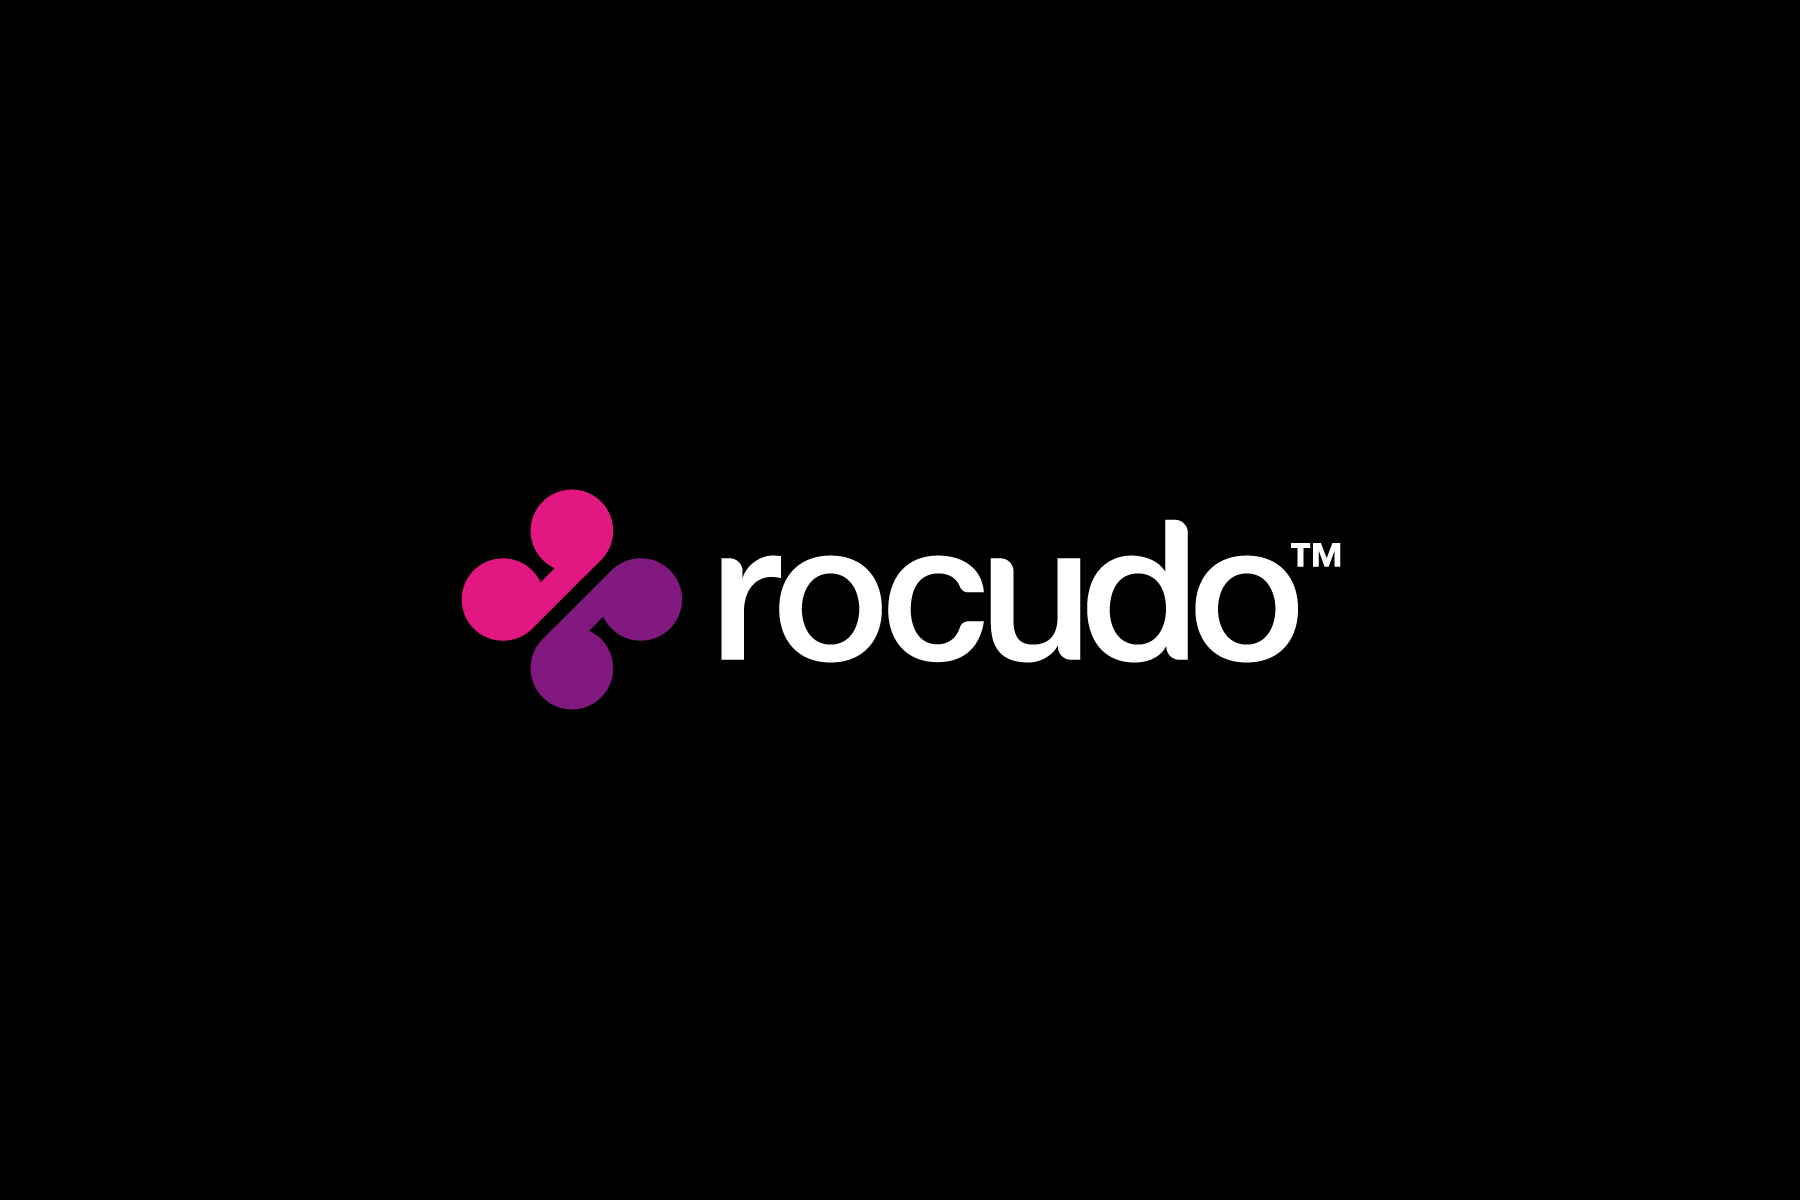 The final chosen symbol for Rocudo is inspired by an old reel to reel device, which hints at the remixing nature of the software platform.